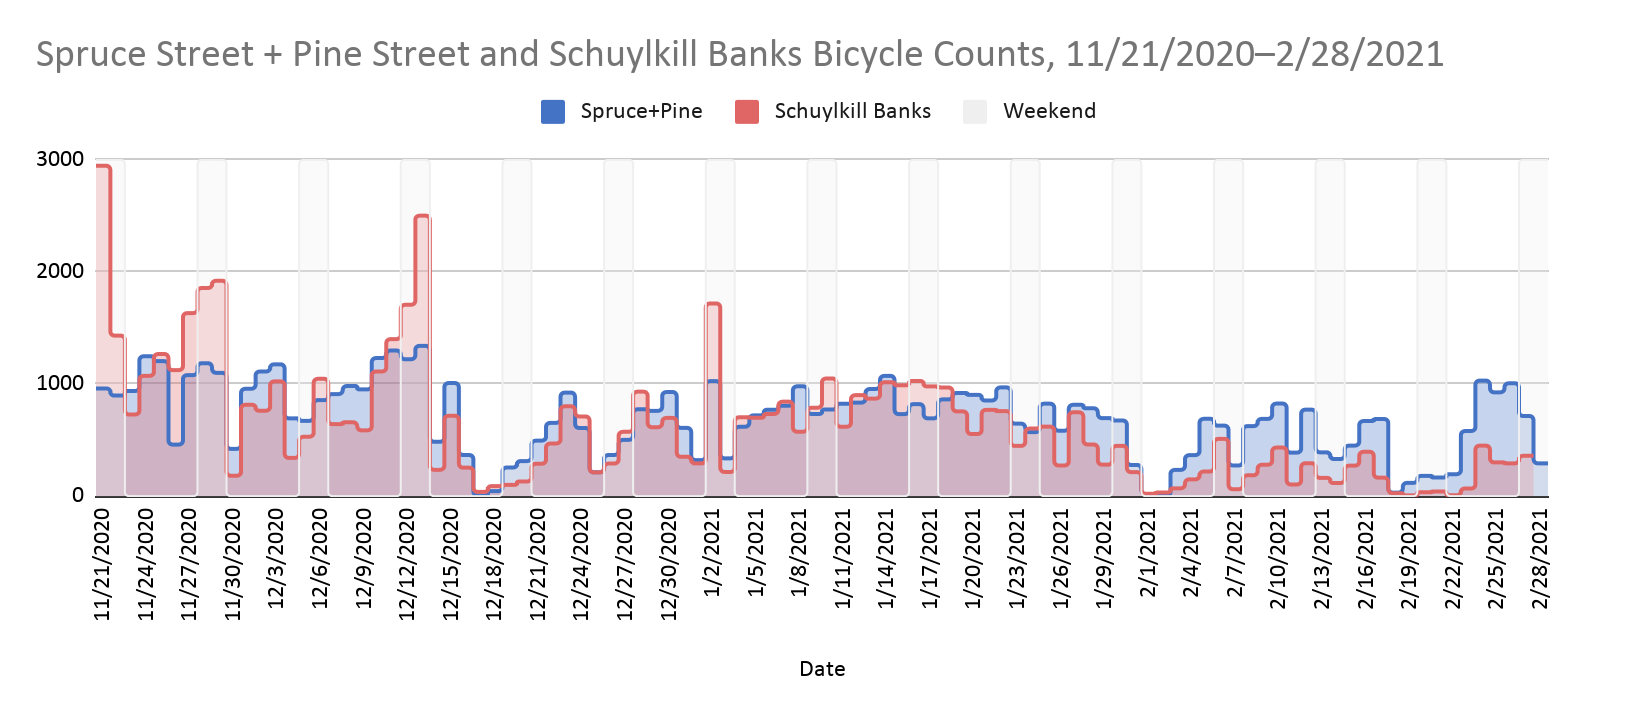 Spruce Street, Pine Street and Schuylkill Banks Bicycle counts from 11/21/2020 - 2/28/2021